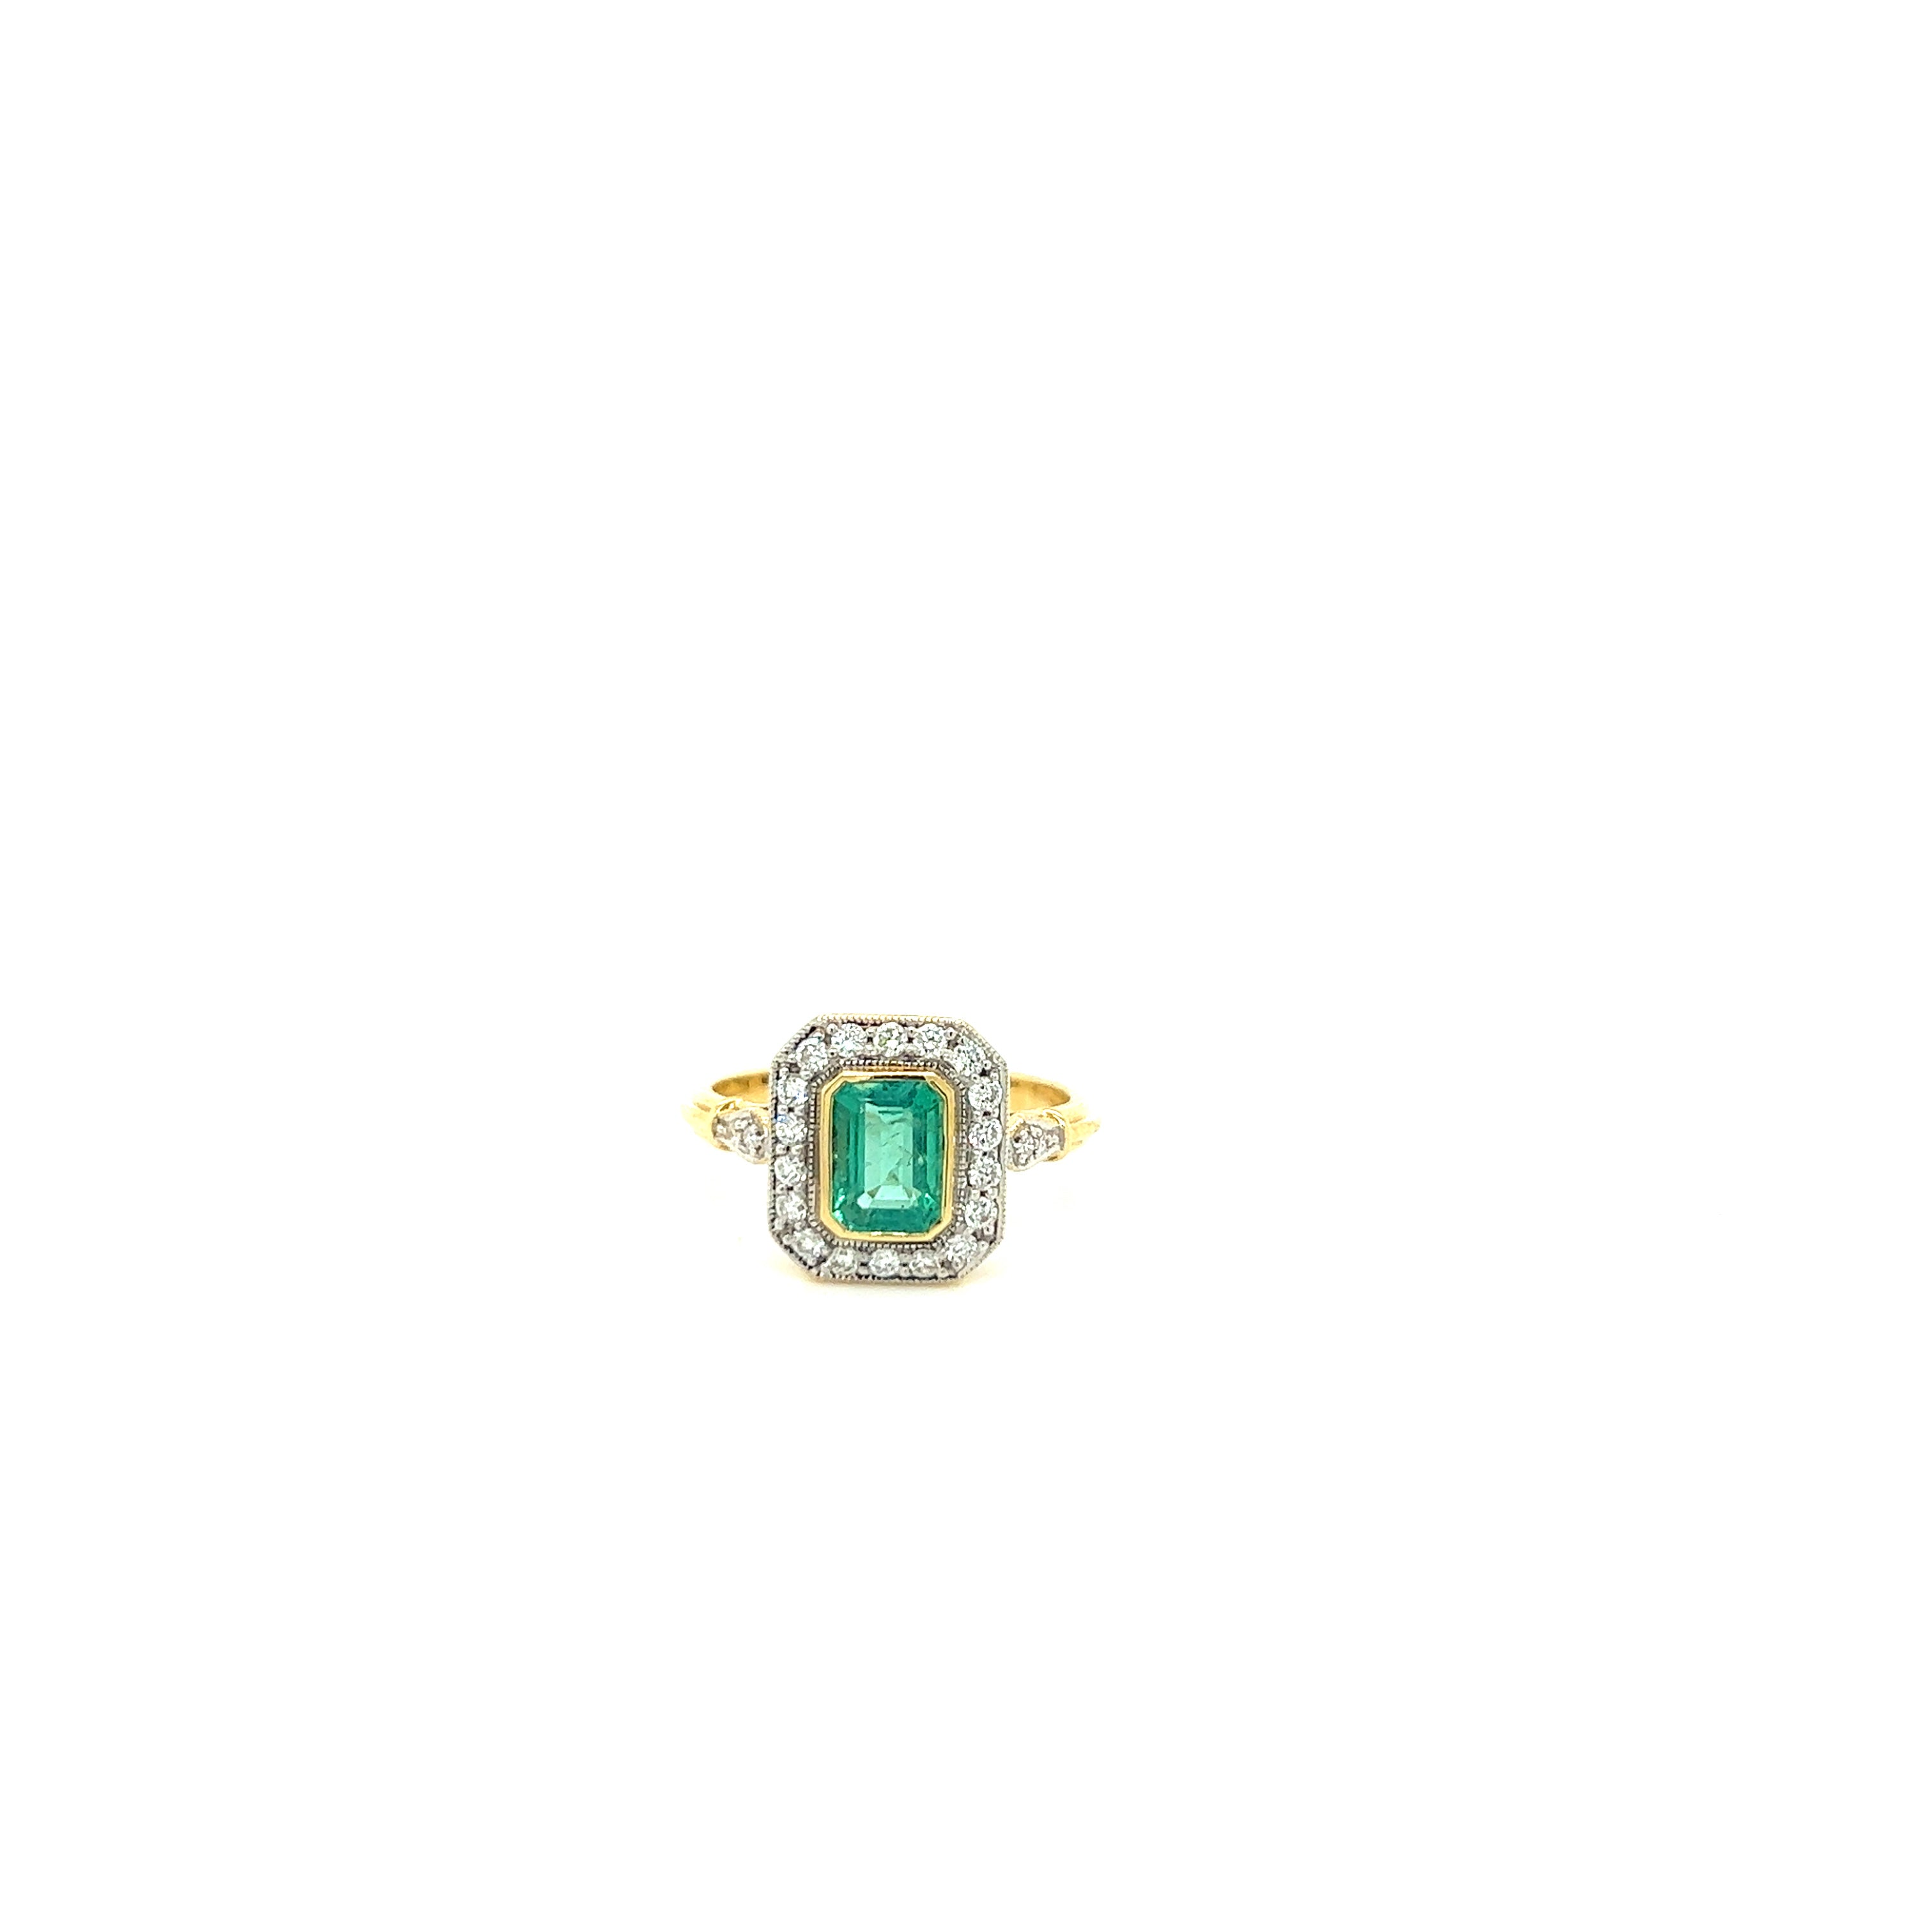 18ct yellow gold emerald and diamond ring.